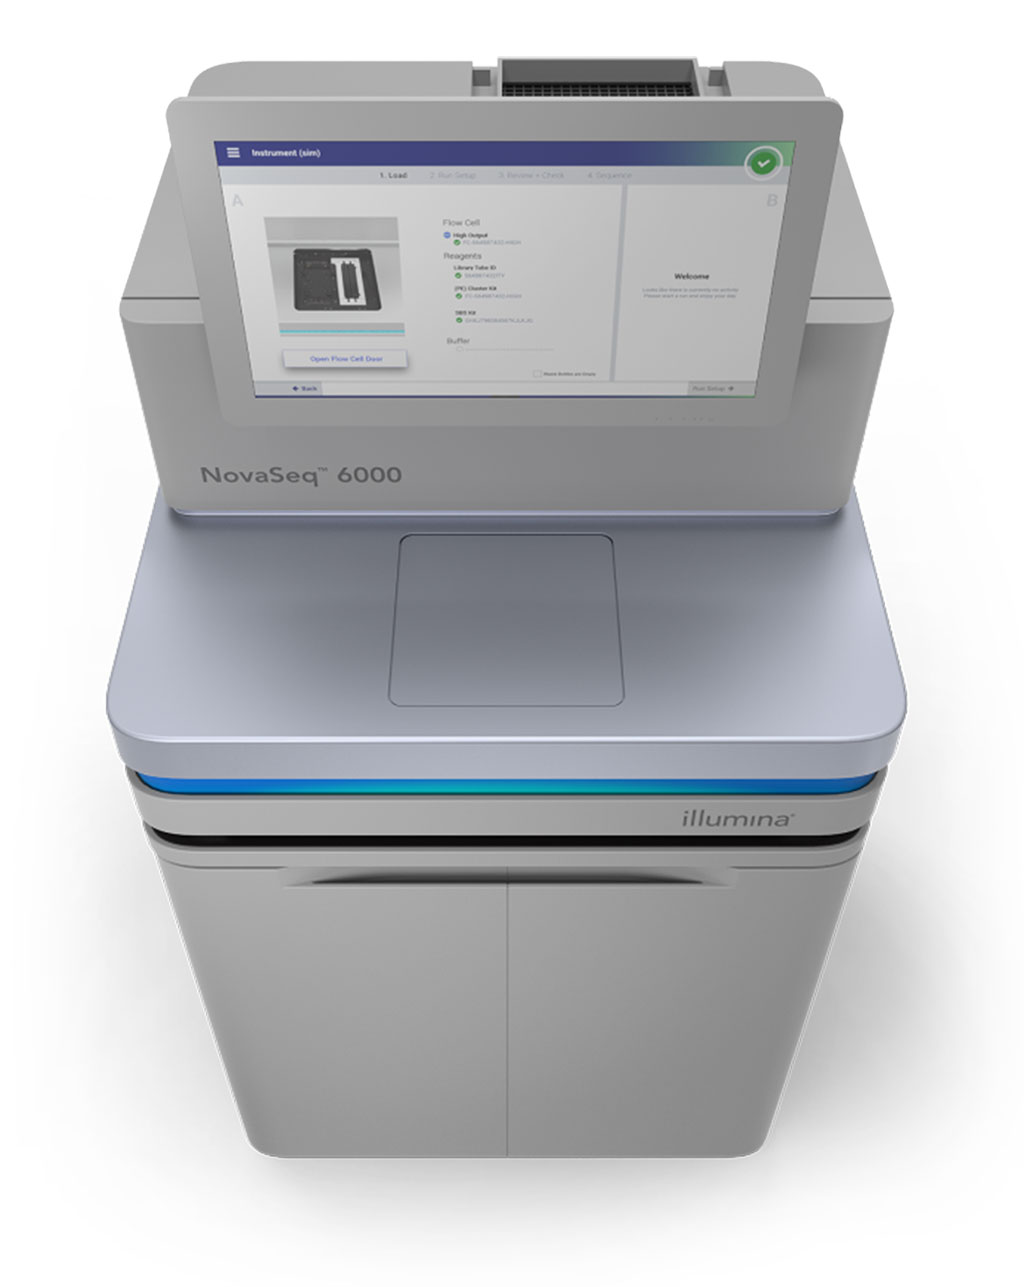 Image: The NovaSeq 6000 offers deeper and broader coverage through advanced applications for a comprehensive view of the genome (Photo courtesy of Illumina)